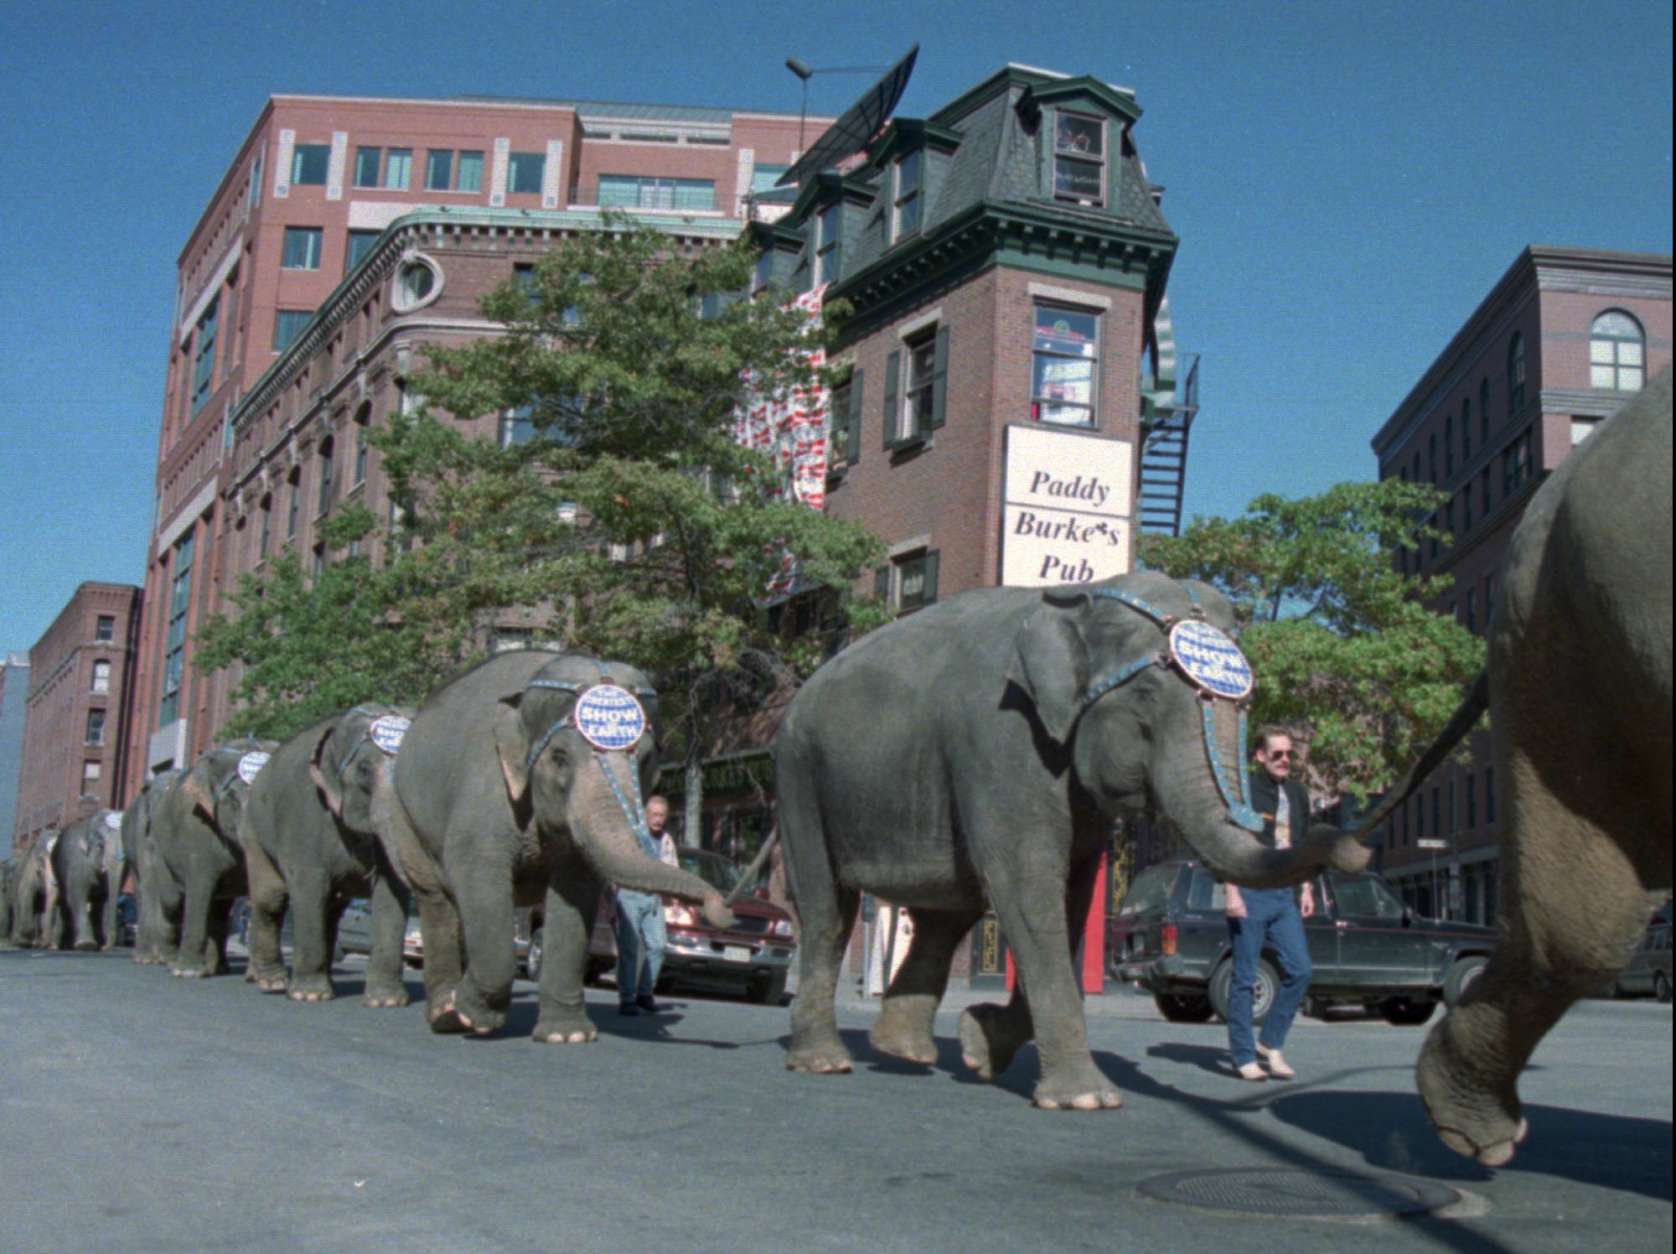 Elephants from the Ringling Bros. Barnum &amp; Bailey circus take a stroll through downtown Boston on their way to lunch at Boston's Fanueil Hall Marketplace, Wednesday, Oct. 8, 1997.  The circus is scheduled to perform in Boston from Oct. 8 through Oct. 19, 1997.  (AP Photo/Angela Rowlings)